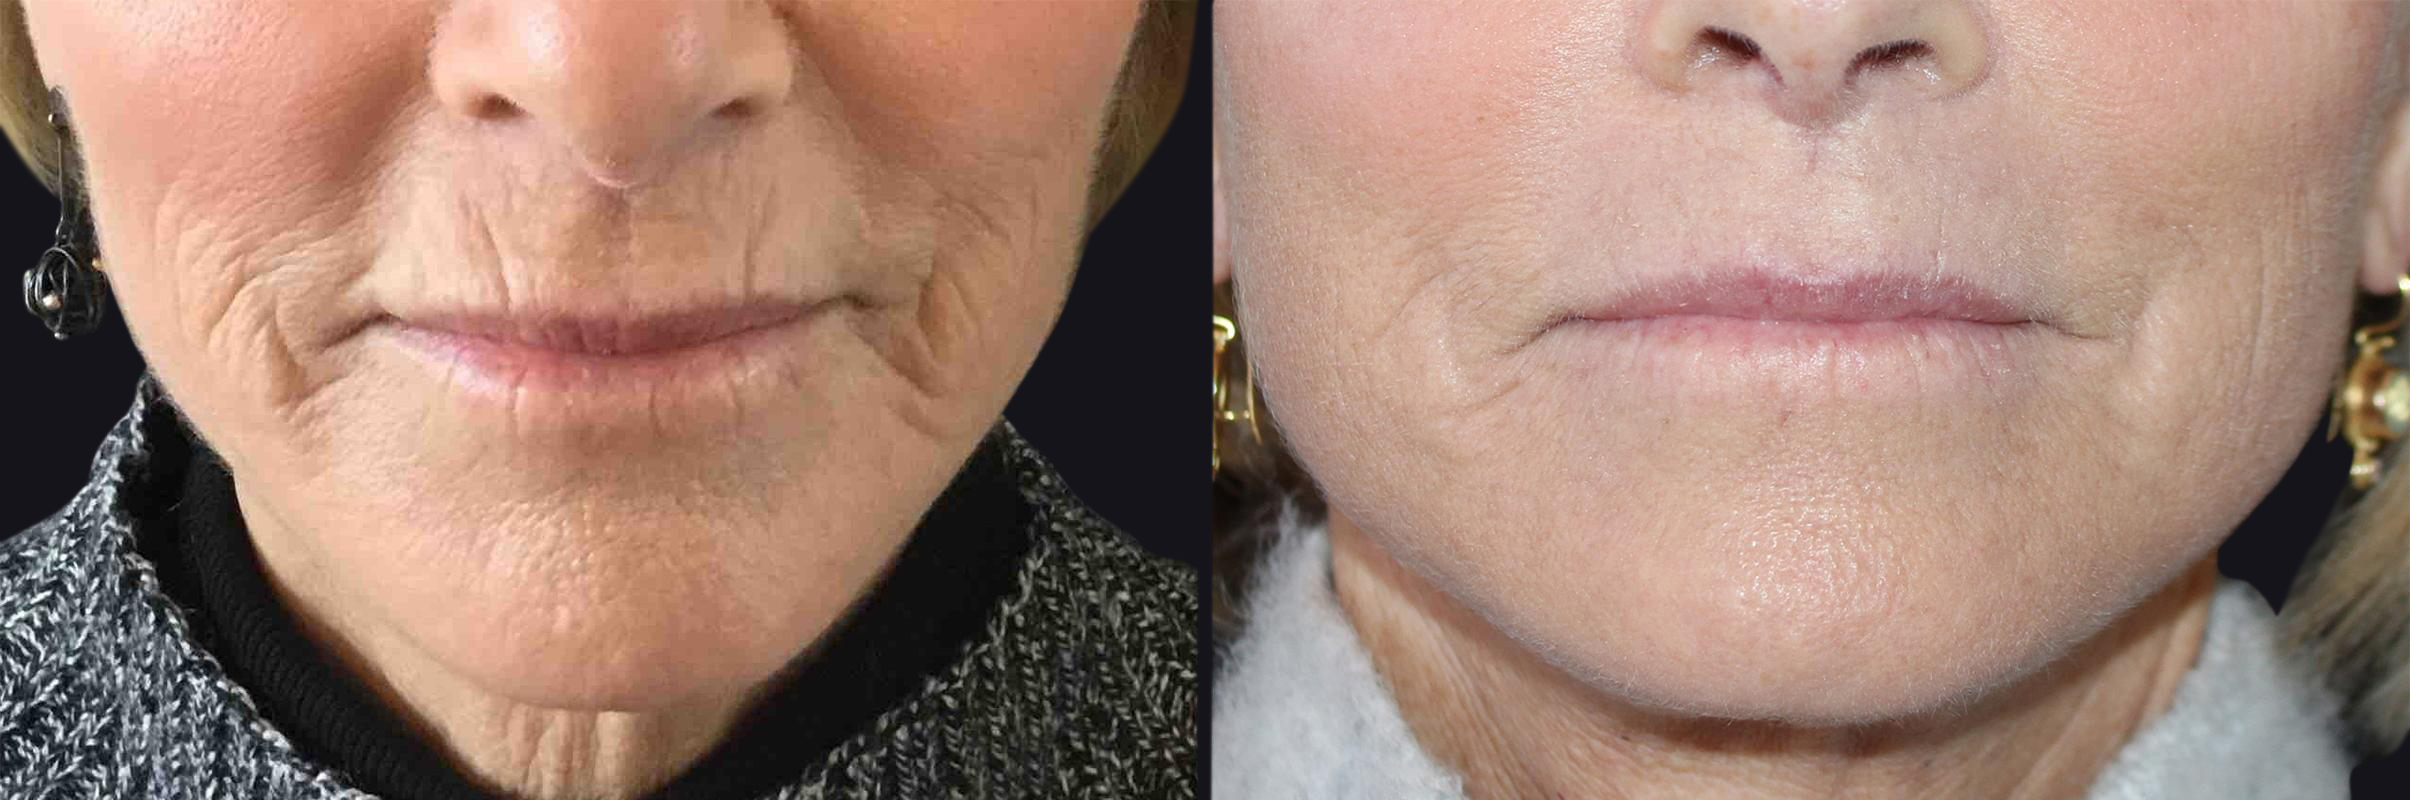 Before and After Collagen Induction Therapy Photos in Boston